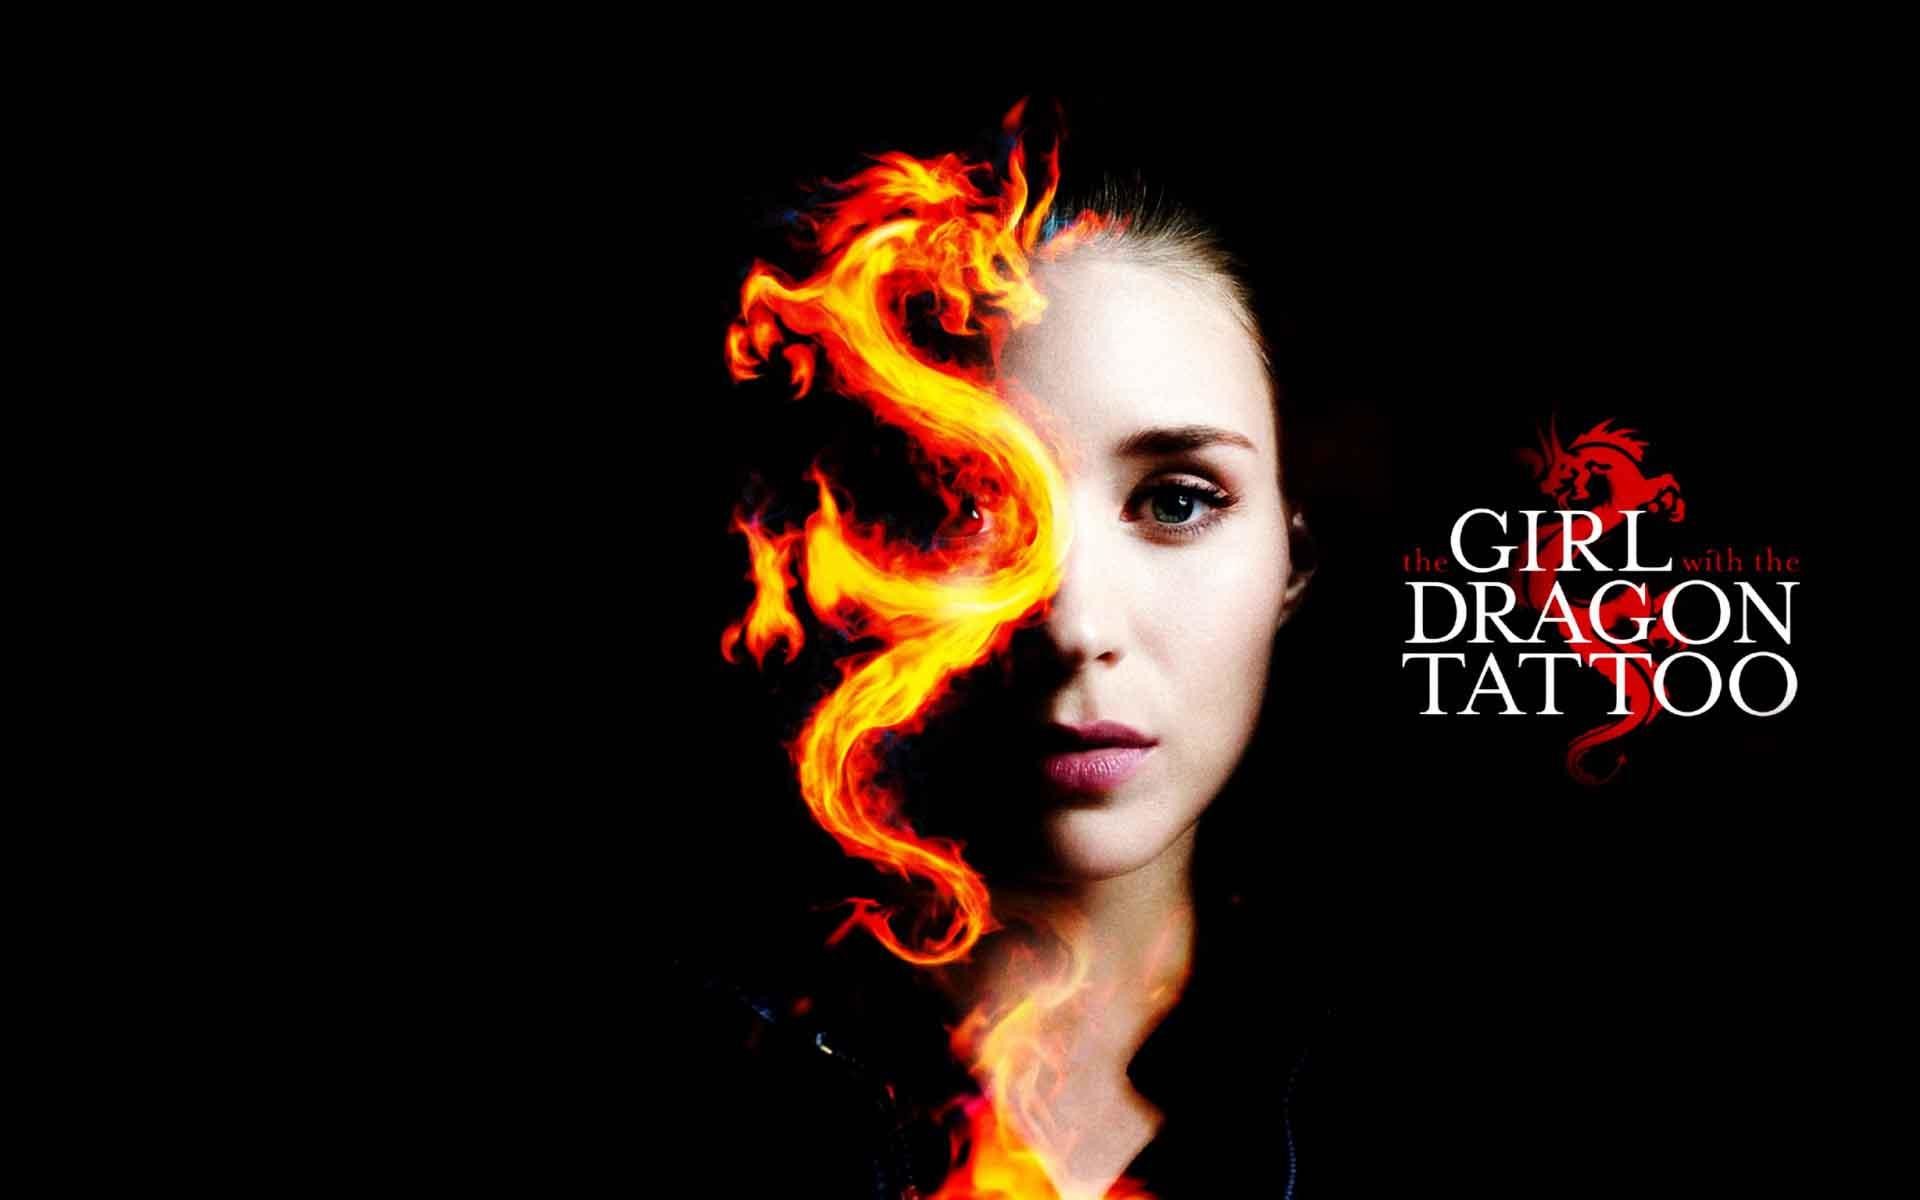 1920x1200 The Girl with the Dragon Tattoo Wallpaper : HD Wallpapers available in  different resolution and sizes